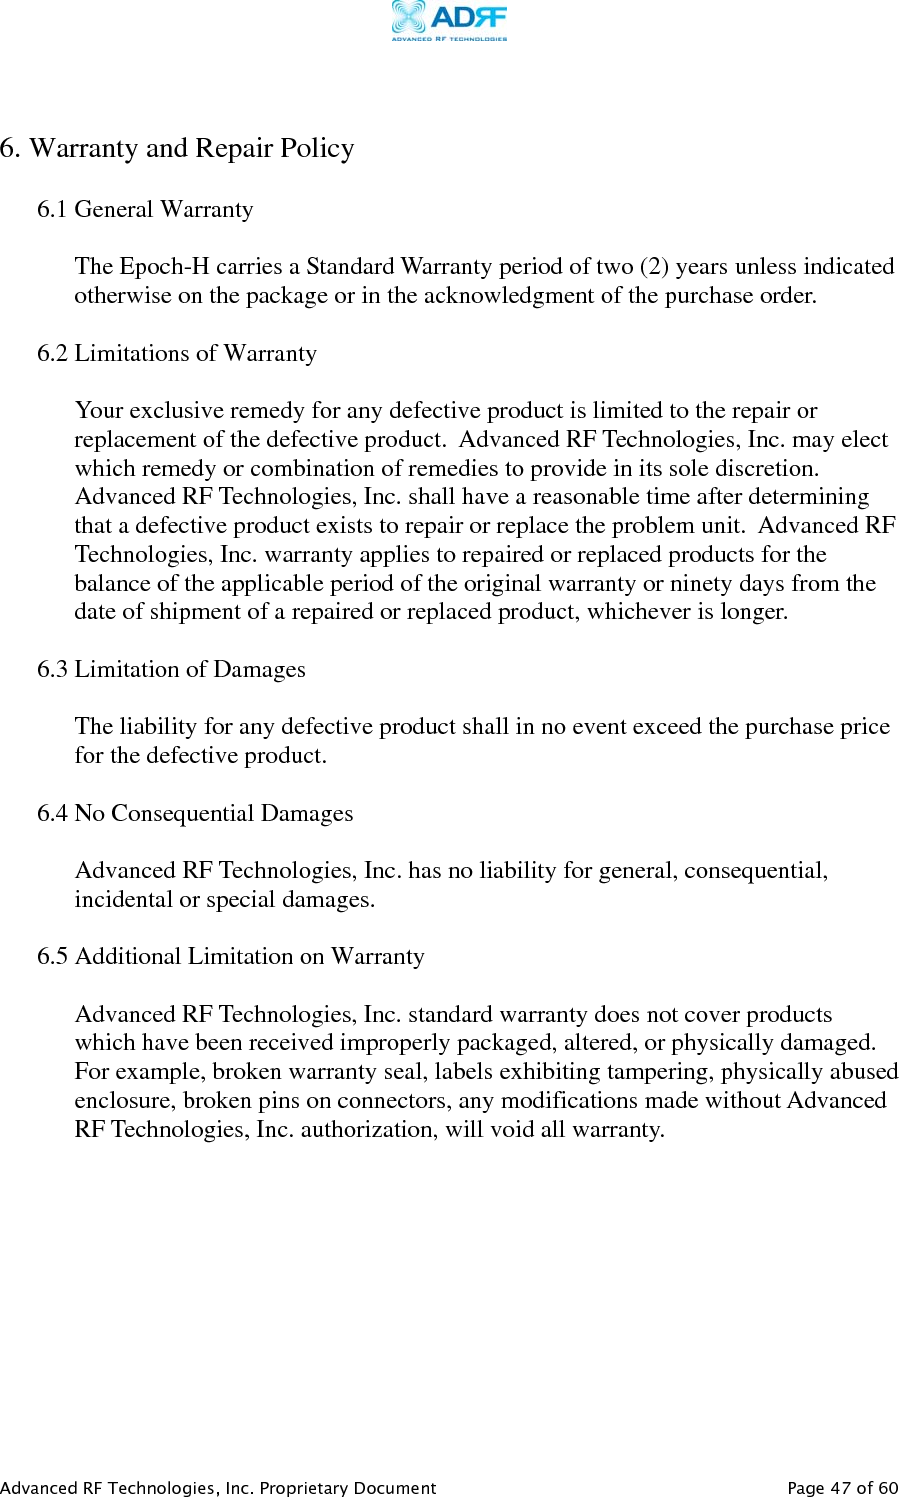     Advanced RF Technologies, Inc. Proprietary Document   Page 47 of 60   6. Warranty and Repair Policy  6.1 General Warranty  The Epoch-H carries a Standard Warranty period of two (2) years unless indicated otherwise on the package or in the acknowledgment of the purchase order.  6.2 Limitations of Warranty  Your exclusive remedy for any defective product is limited to the repair or replacement of the defective product.  Advanced RF Technologies, Inc. may elect which remedy or combination of remedies to provide in its sole discretion.  Advanced RF Technologies, Inc. shall have a reasonable time after determining that a defective product exists to repair or replace the problem unit.  Advanced RF Technologies, Inc. warranty applies to repaired or replaced products for the balance of the applicable period of the original warranty or ninety days from the date of shipment of a repaired or replaced product, whichever is longer.   6.3 Limitation of Damages  The liability for any defective product shall in no event exceed the purchase price for the defective product.    6.4 No Consequential Damages  Advanced RF Technologies, Inc. has no liability for general, consequential, incidental or special damages.    6.5 Additional Limitation on Warranty  Advanced RF Technologies, Inc. standard warranty does not cover products which have been received improperly packaged, altered, or physically damaged.  For example, broken warranty seal, labels exhibiting tampering, physically abused enclosure, broken pins on connectors, any modifications made without Advanced RF Technologies, Inc. authorization, will void all warranty.    